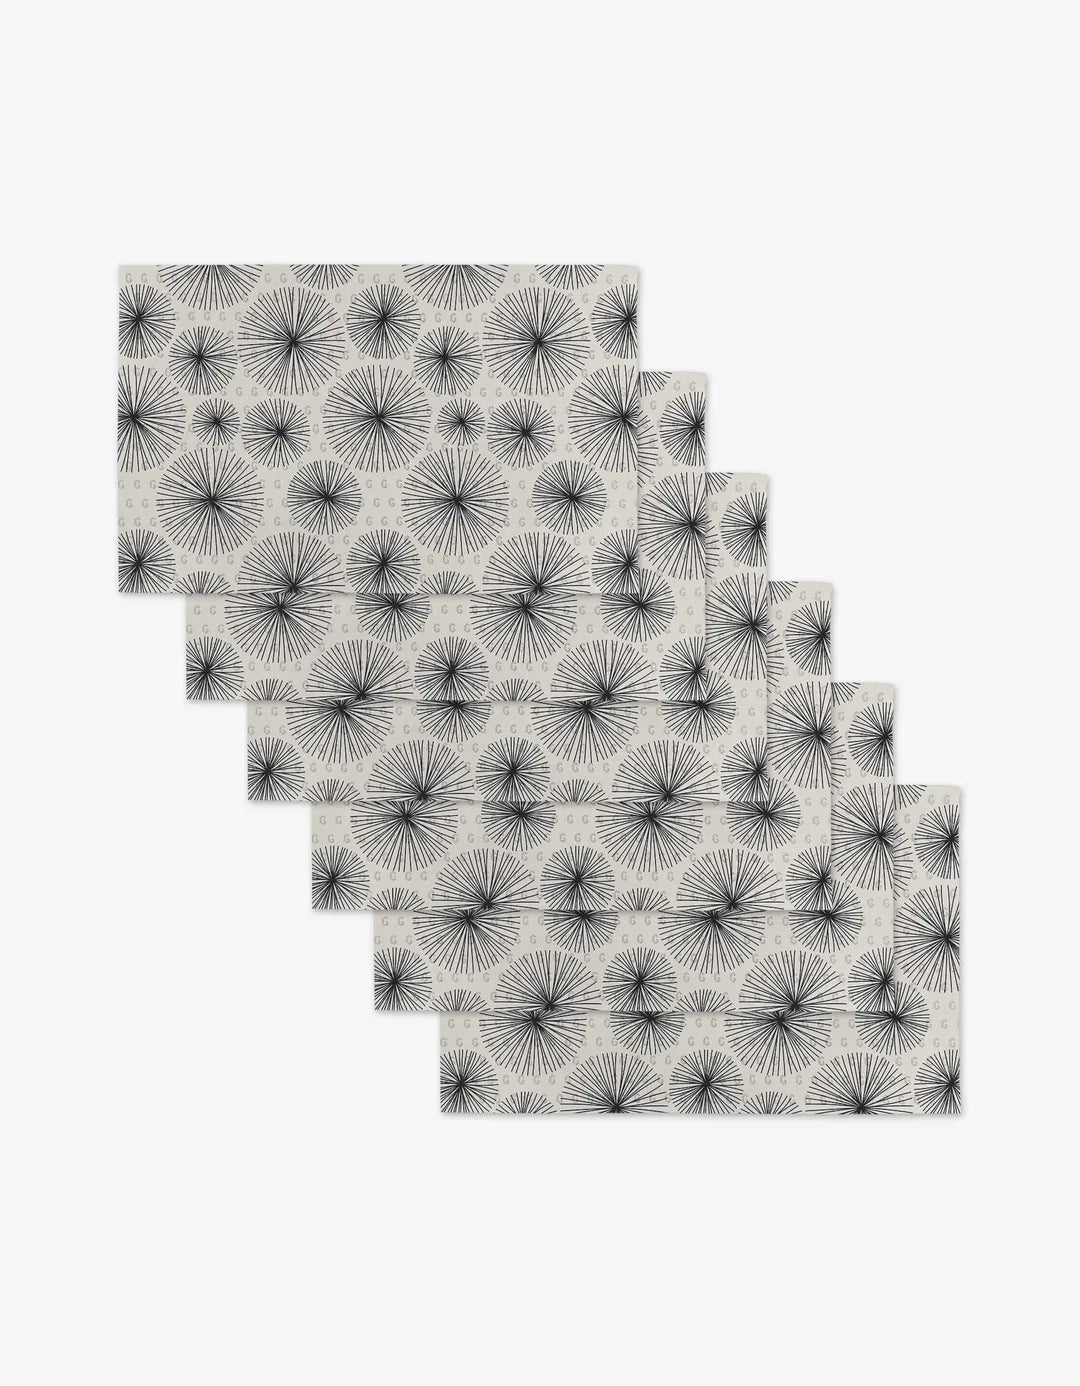 Geometry Sky Party "Not Paper Towel" (Set of 6)